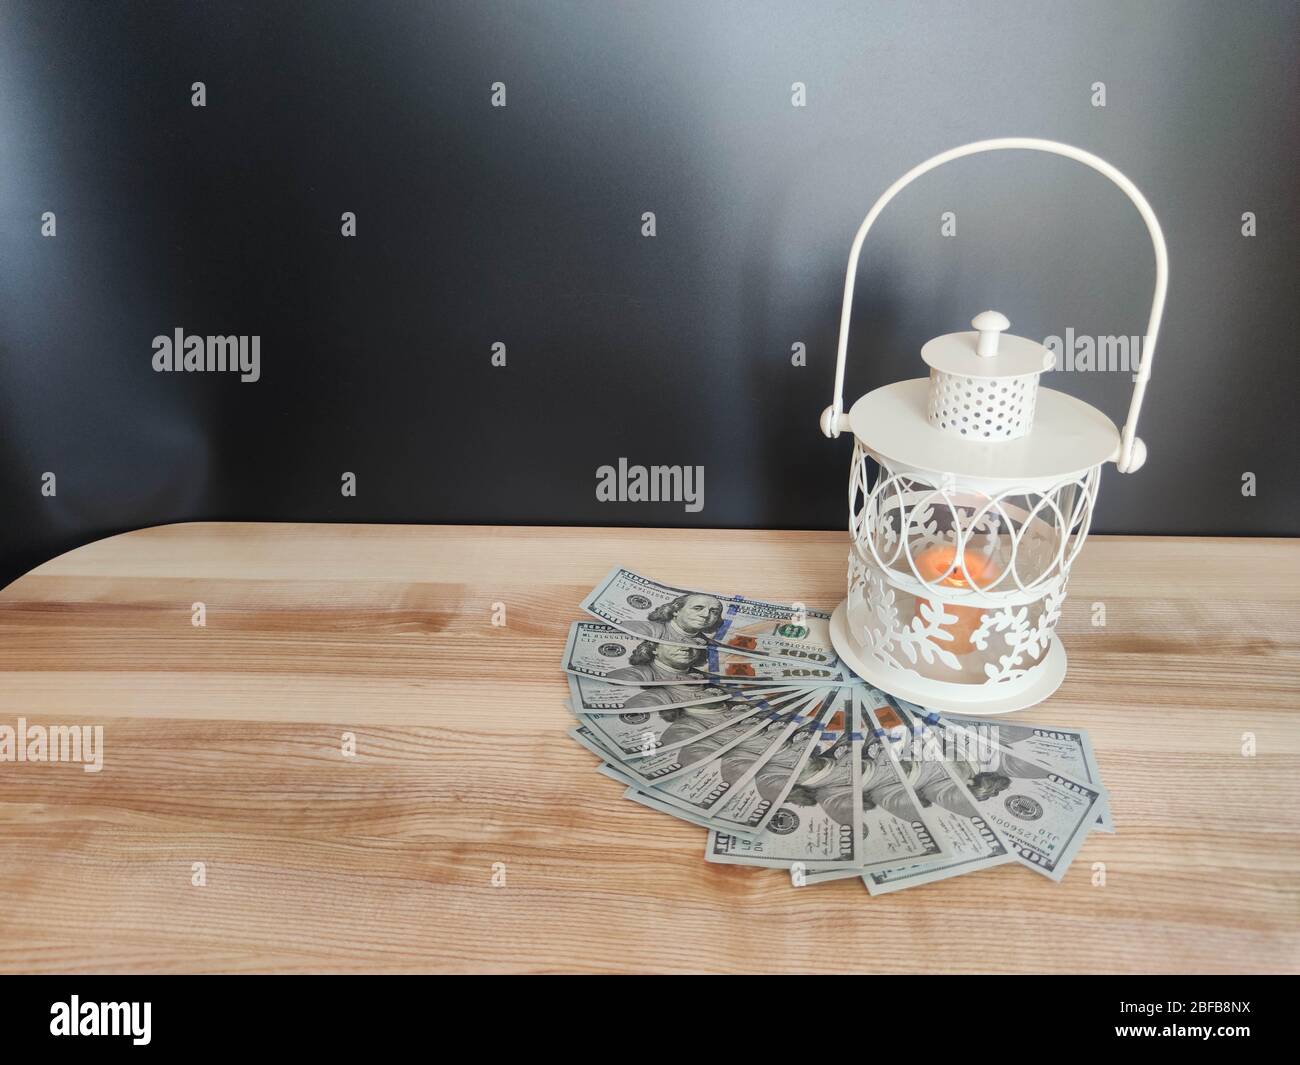 White lantern with an orange candle, 100 dollar banknotes and a mask on the table with black backdrop. Concept - Ramadan kareem holiday celebration in Stock Photo